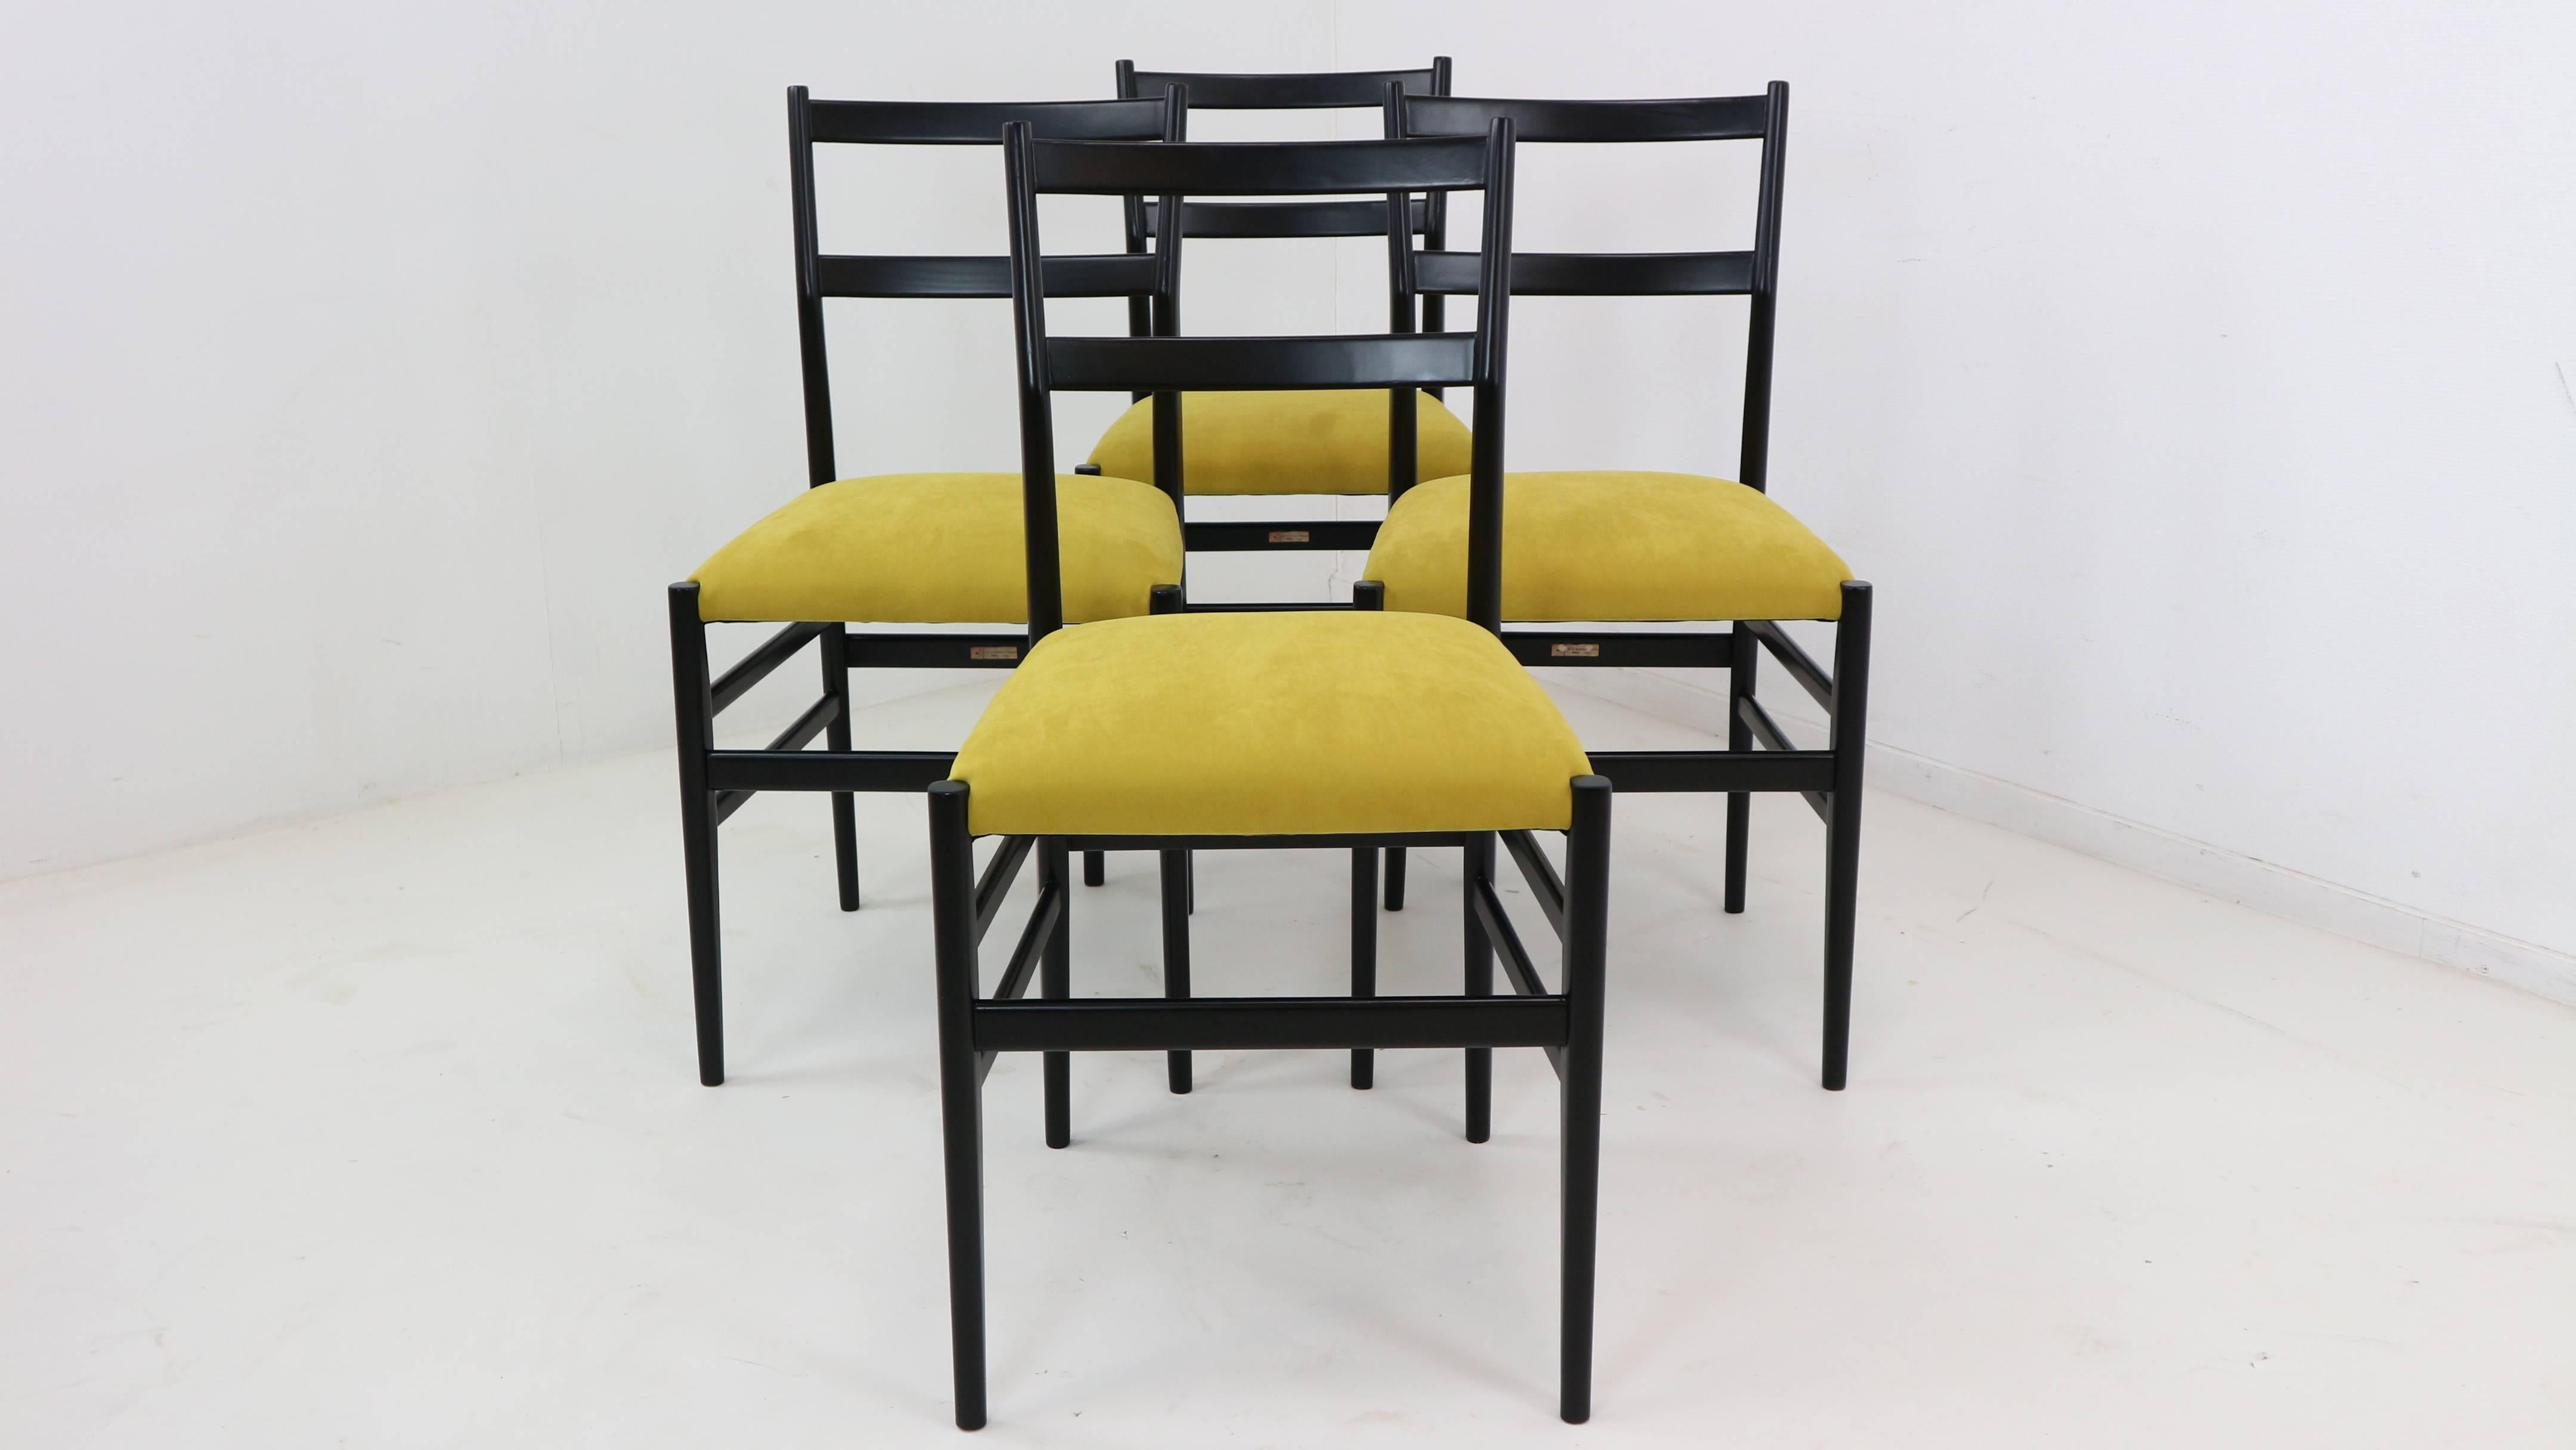 This set of four Leggera chairs was designed by Gio Ponti in 1951. They were manufactured by Cassina in 1952. After few years, in 1957, Ponti tweaked the design and released the iconic Superleggera model. This version is made from black lacquered